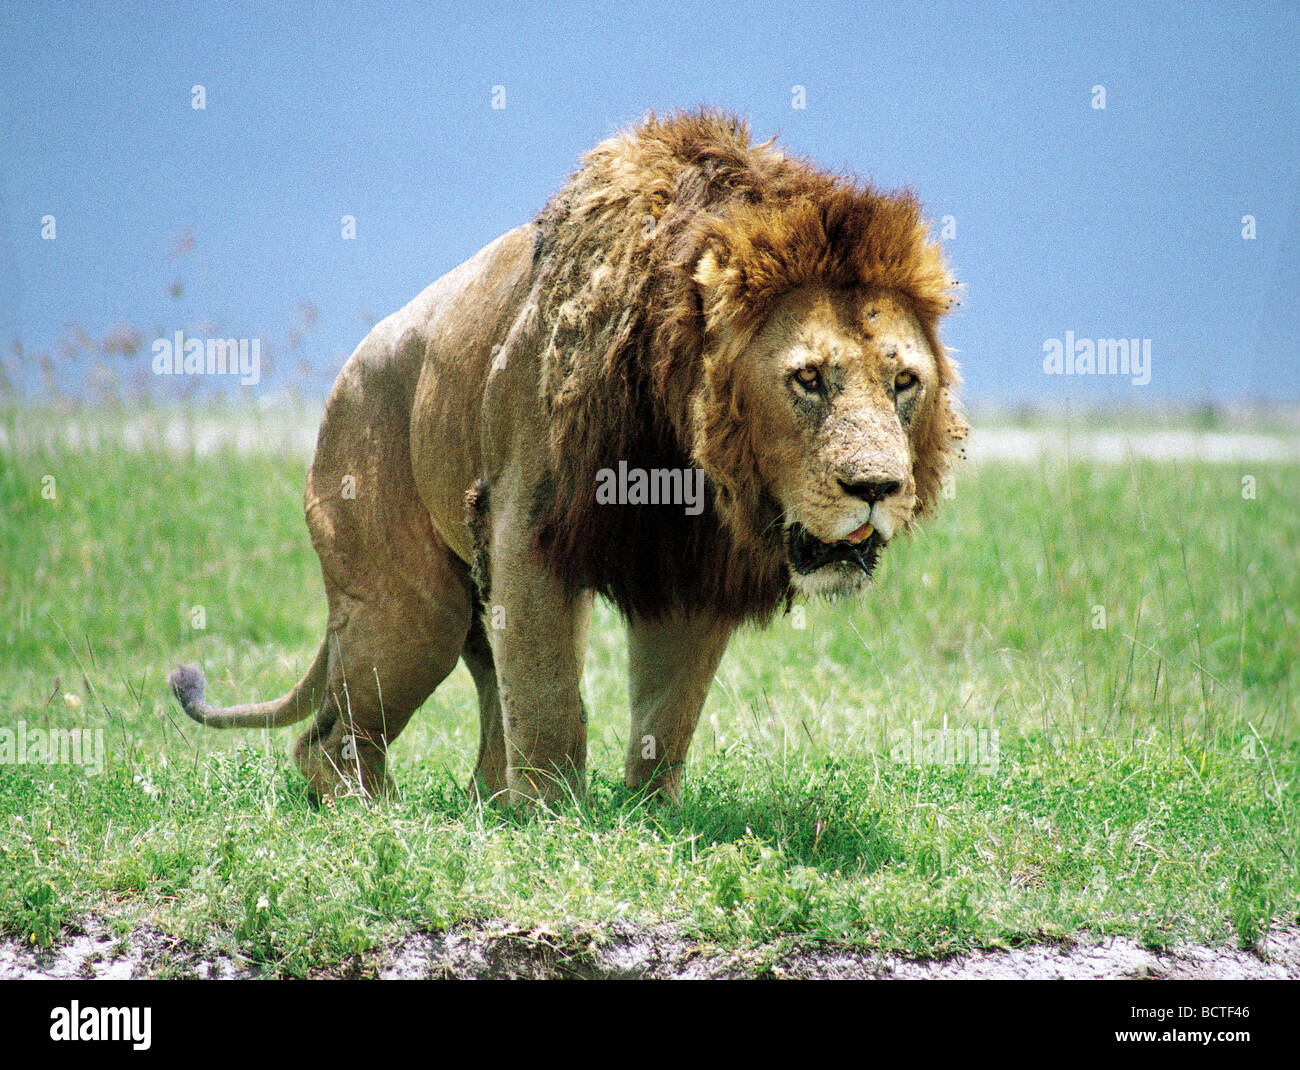 Male Lion scratching to mark territory Ngorongoro Crater Tanzania East Africa Stock Photo